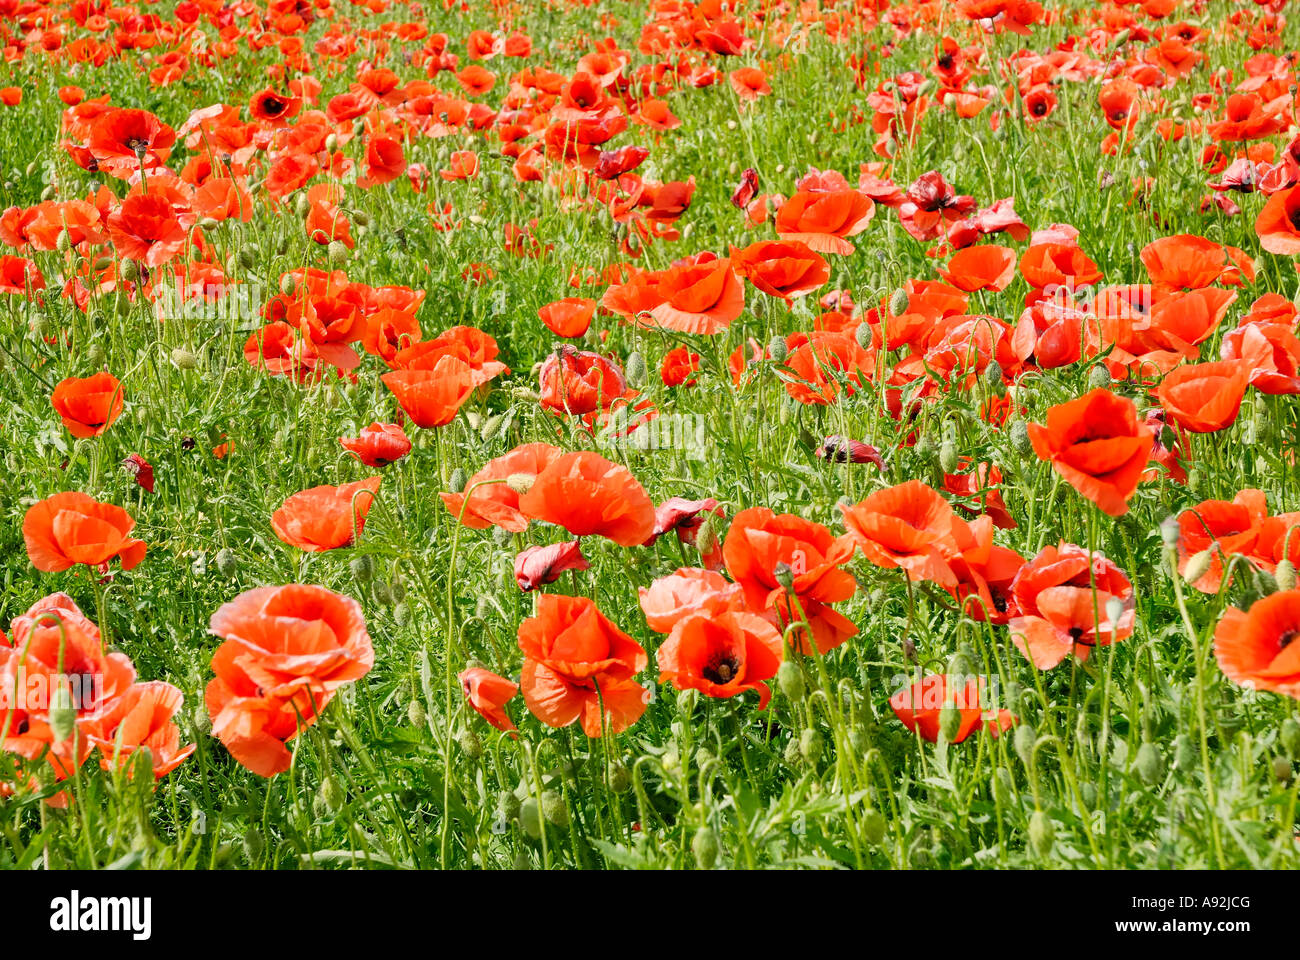 Fallow field sparkled red by poppy flowers, papaver rhoeas L; Papaveraceae swaying in the wind Stock Photo